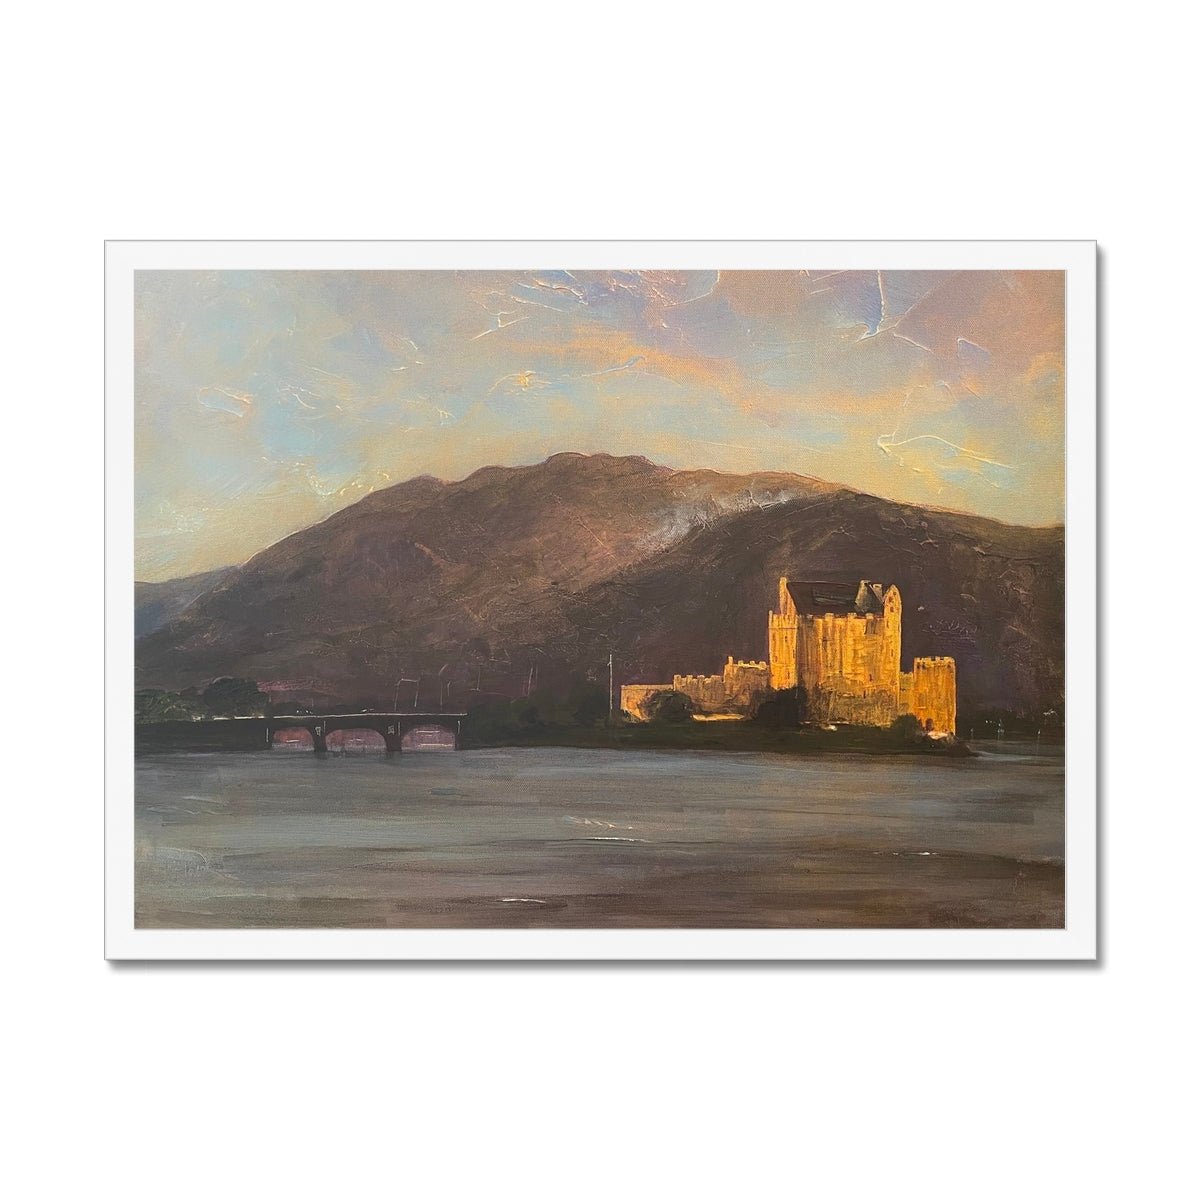 Eilean Donan Castle Painting | Framed Prints From Scotland-Framed Prints-Historic & Iconic Scotland Art Gallery-A2 Landscape-White Frame-Paintings, Prints, Homeware, Art Gifts From Scotland By Scottish Artist Kevin Hunter